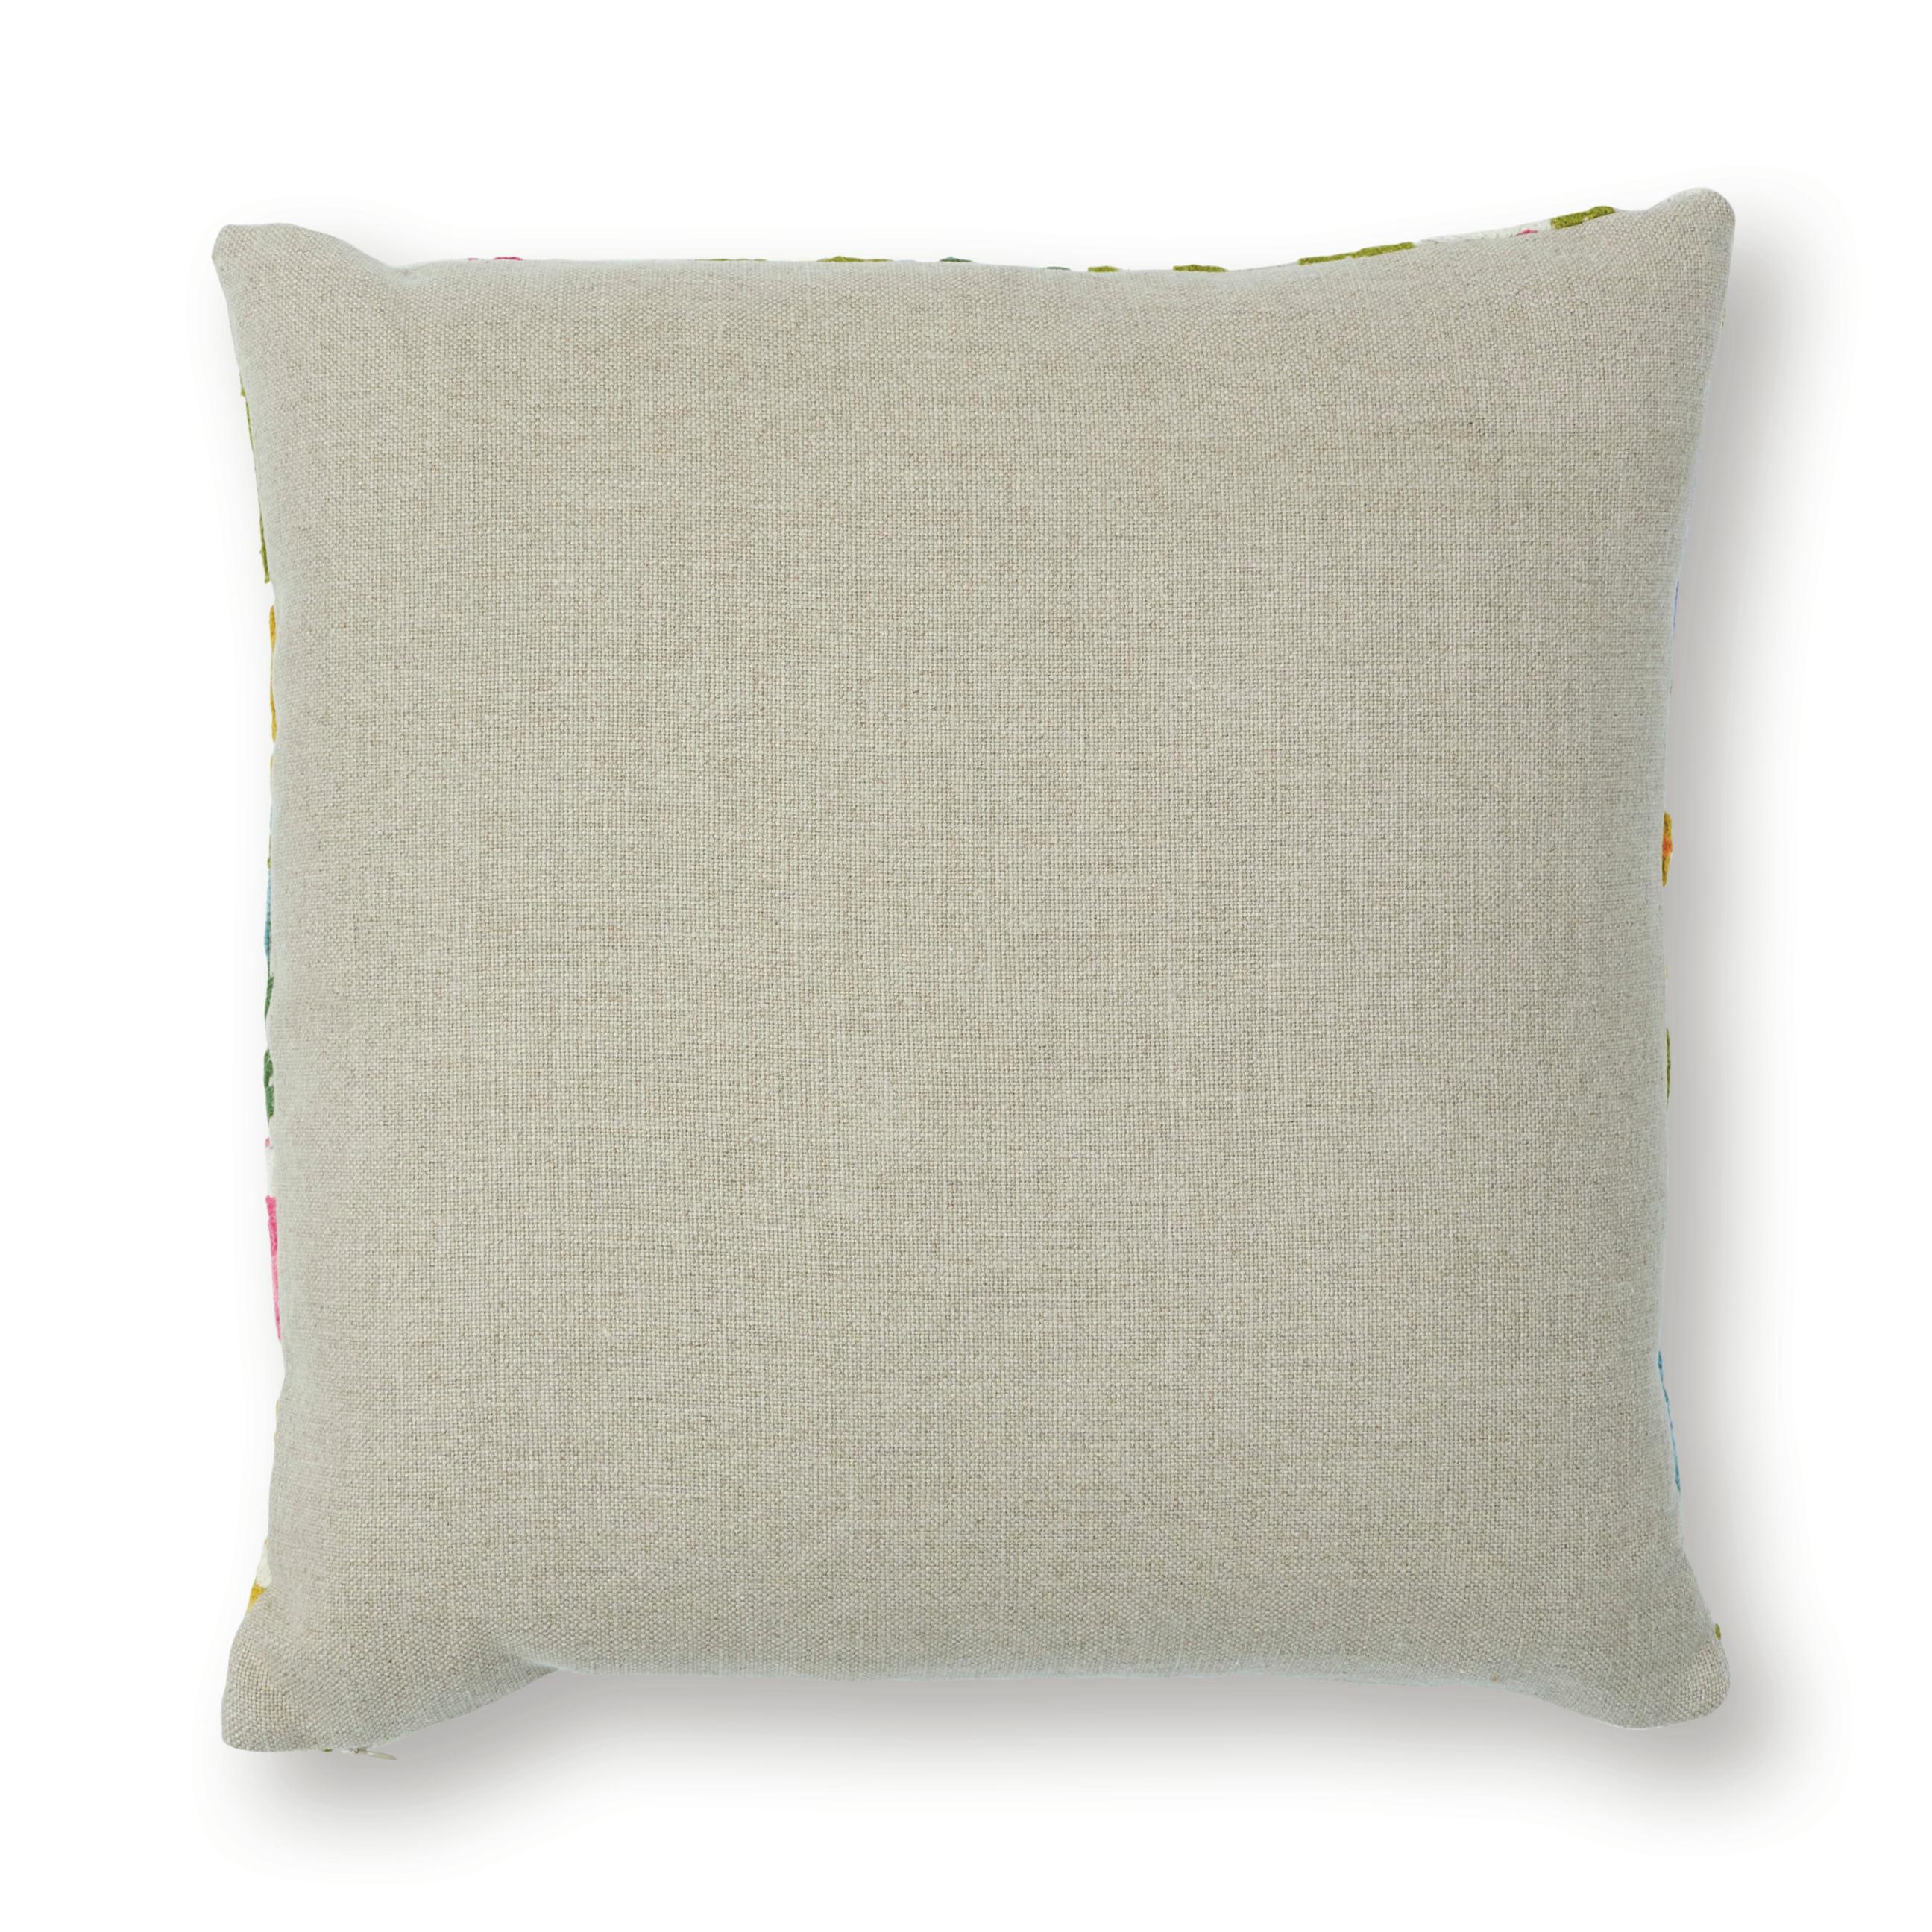 This pillow features Crewel Garden with a knife edge finish. Based on a document from our archives, this cheery, chain stitched floral pattern is a dead ringer for the original from the 1960s, demonstrating Schumacher‚Äôs commitment to quality and